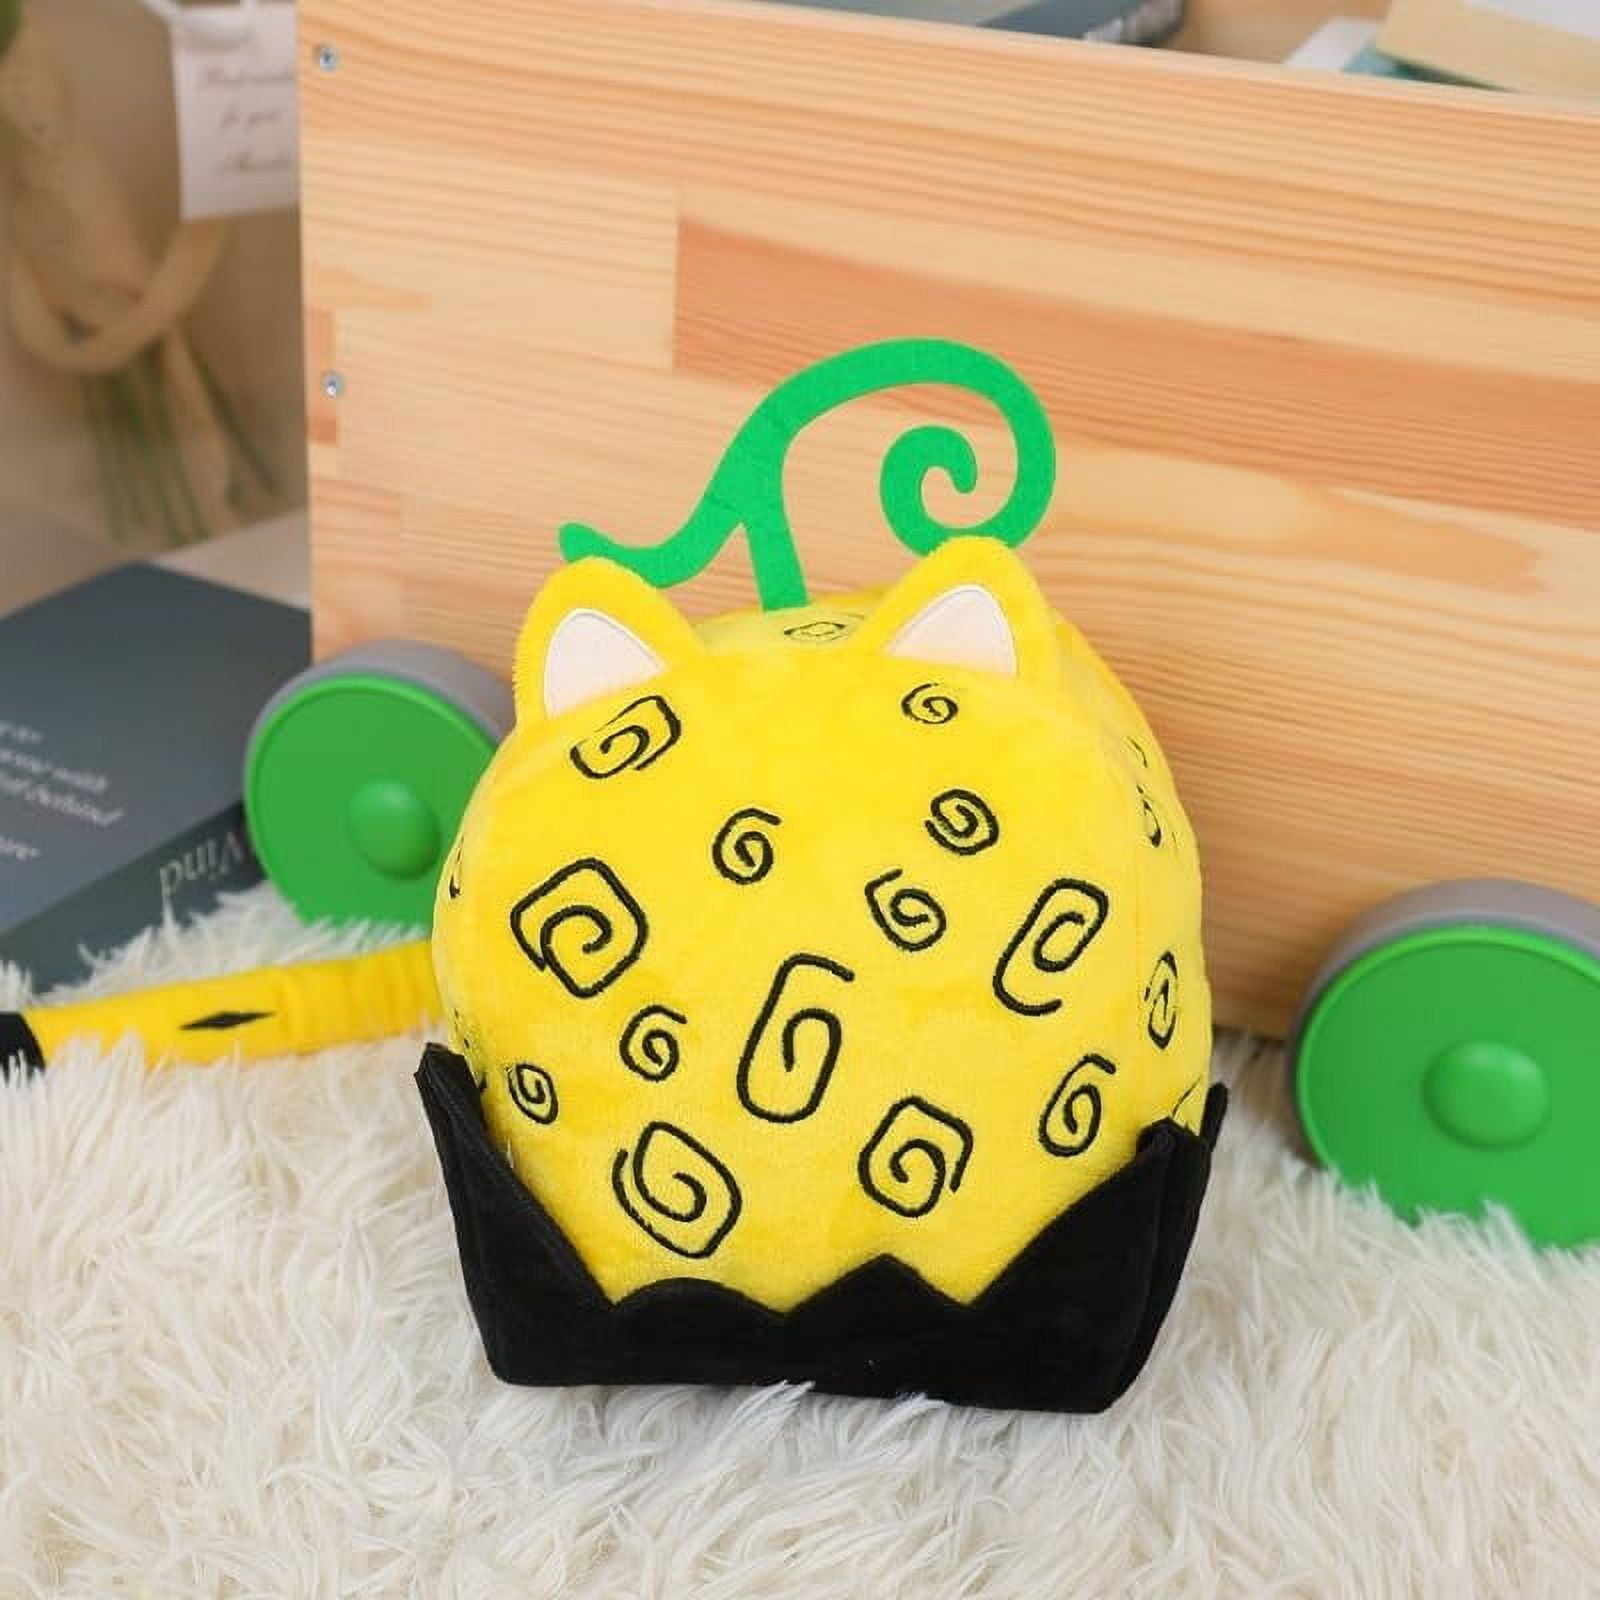  NOHOP 6 Blox Fruits Plush Plushies Toy Plush Pillow Stuffed  Animal, Soft Kawaii Hugging Plush Squishy Pillow Toy Gifts for Kids Child  Teens Home Bedroom Decor (Leopard) : Toys & Games